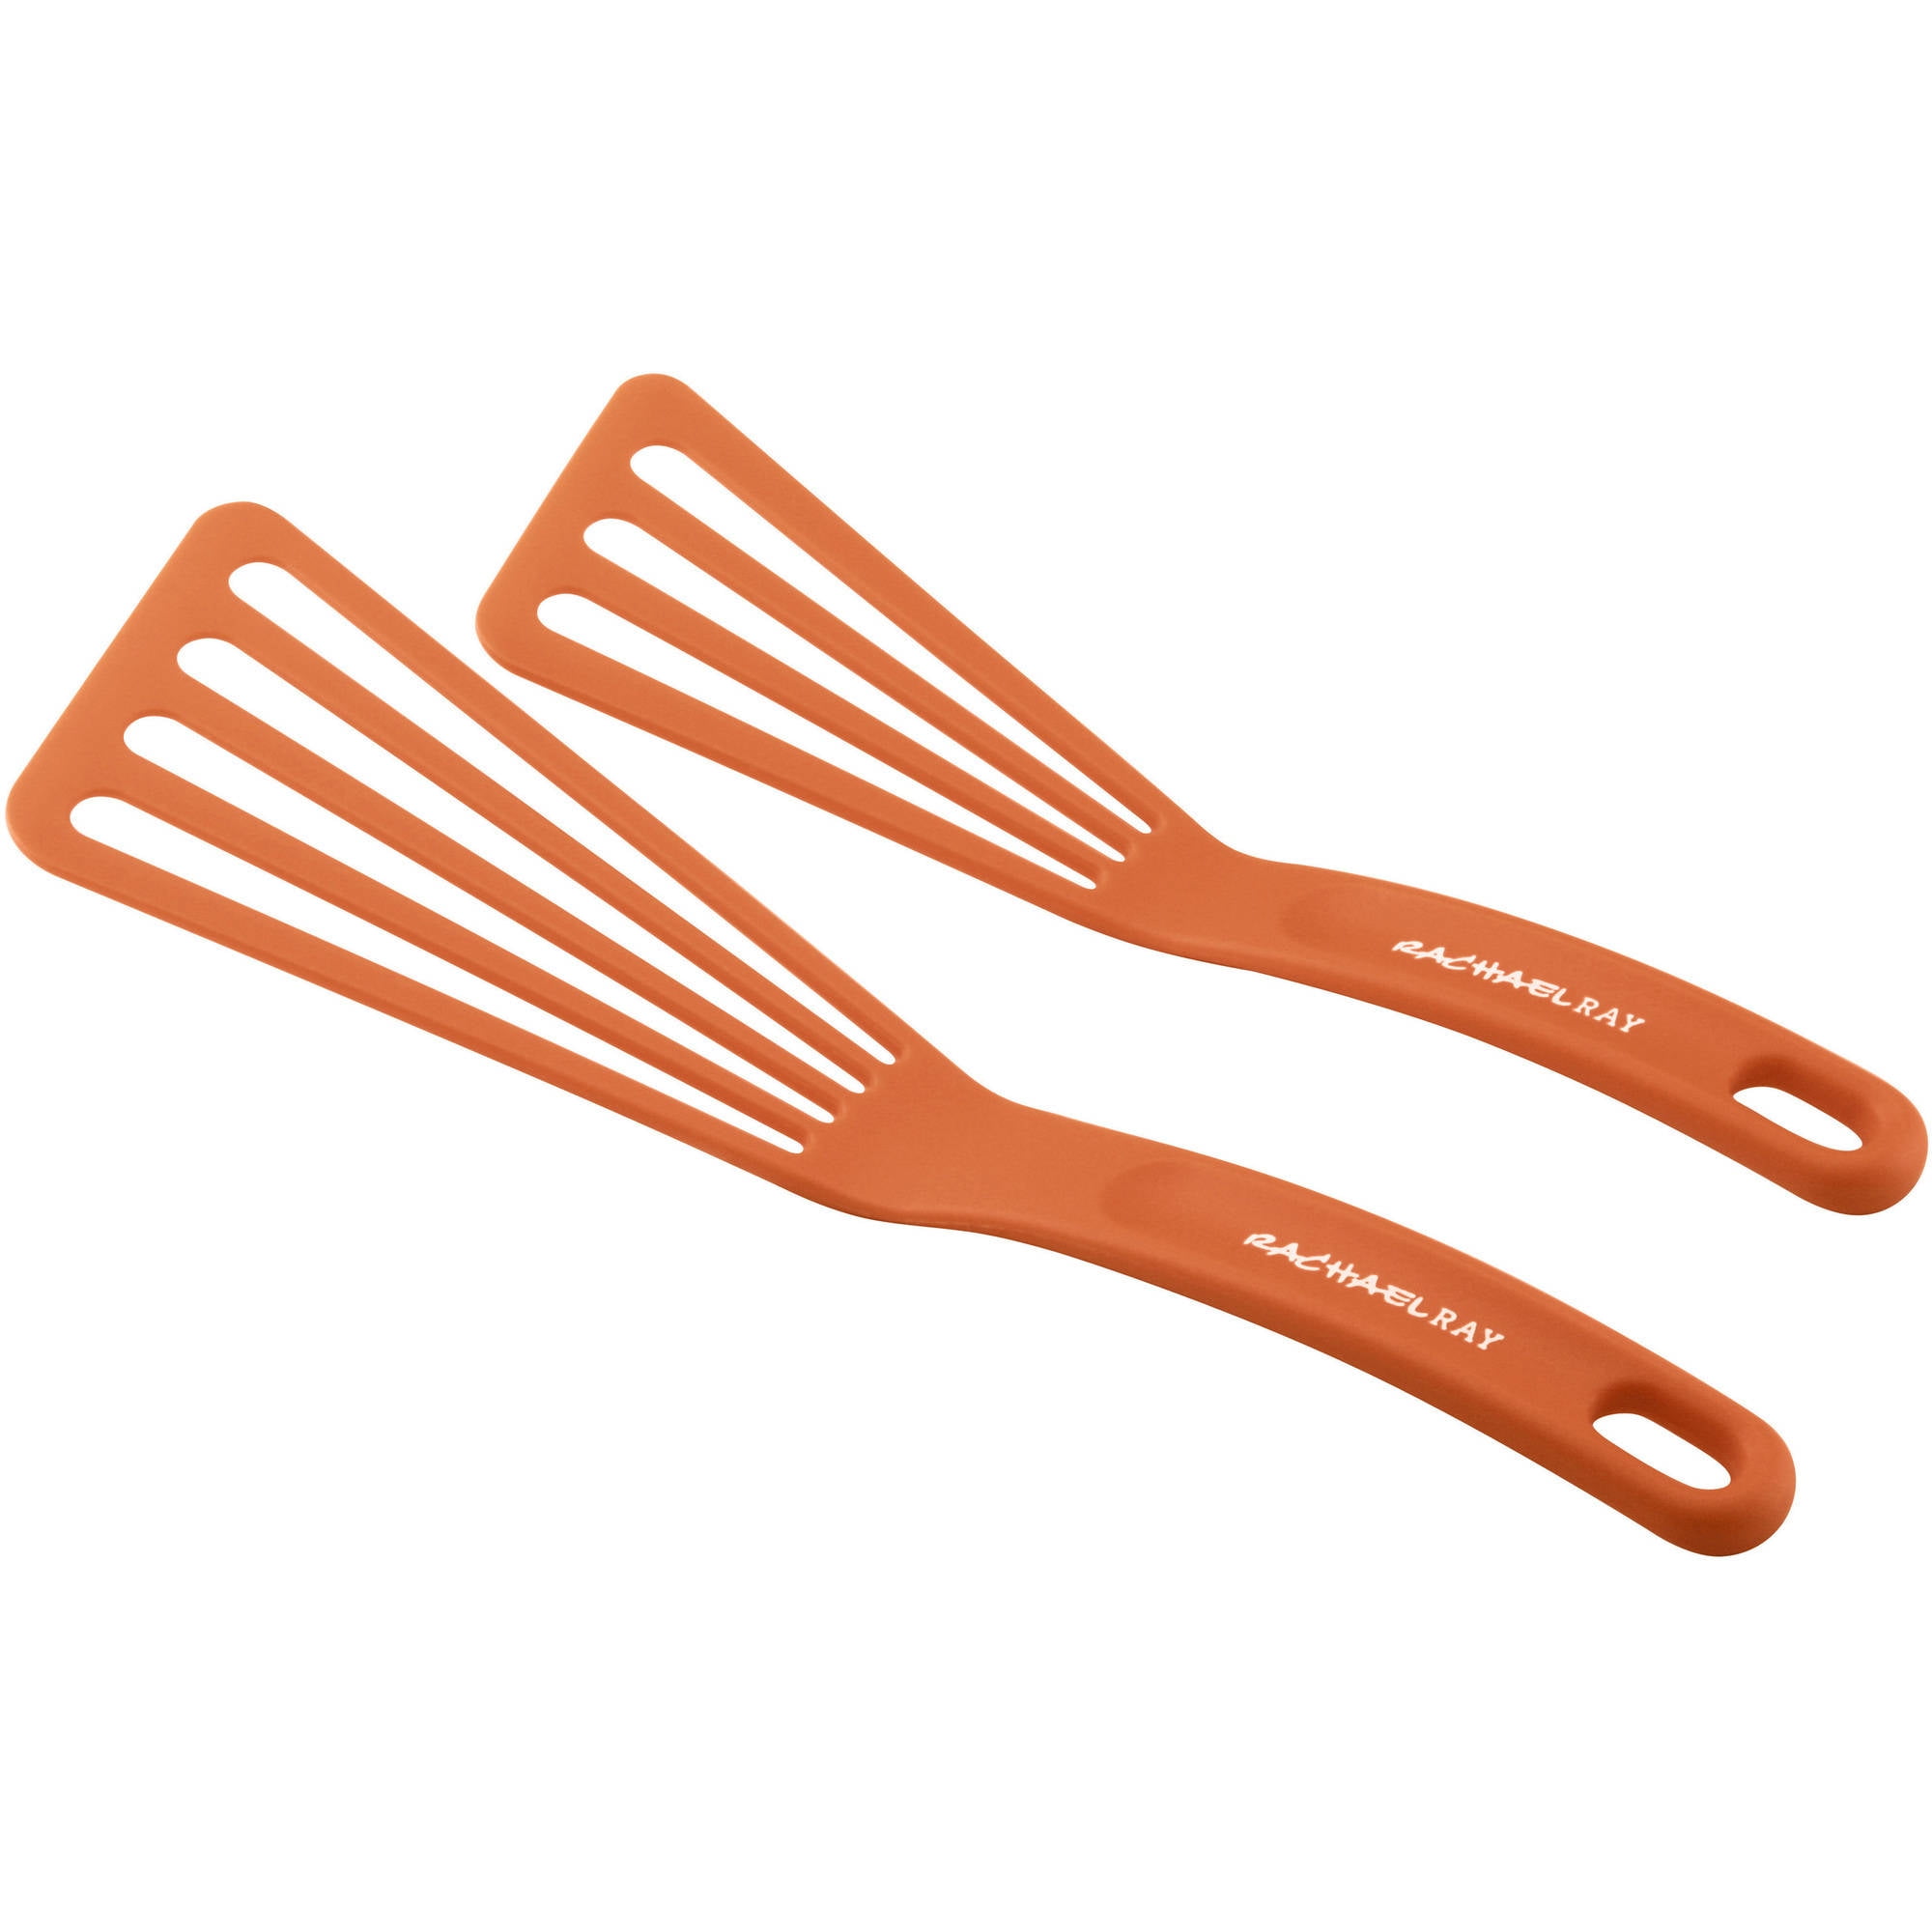 Heavy Duty Kitchen Utensils Set, 6 PC Nonstick Nylon, High Heat Resistant for Stovetop and Griddle, 6 Pieces for Cooking (Orange) by DFACKTO